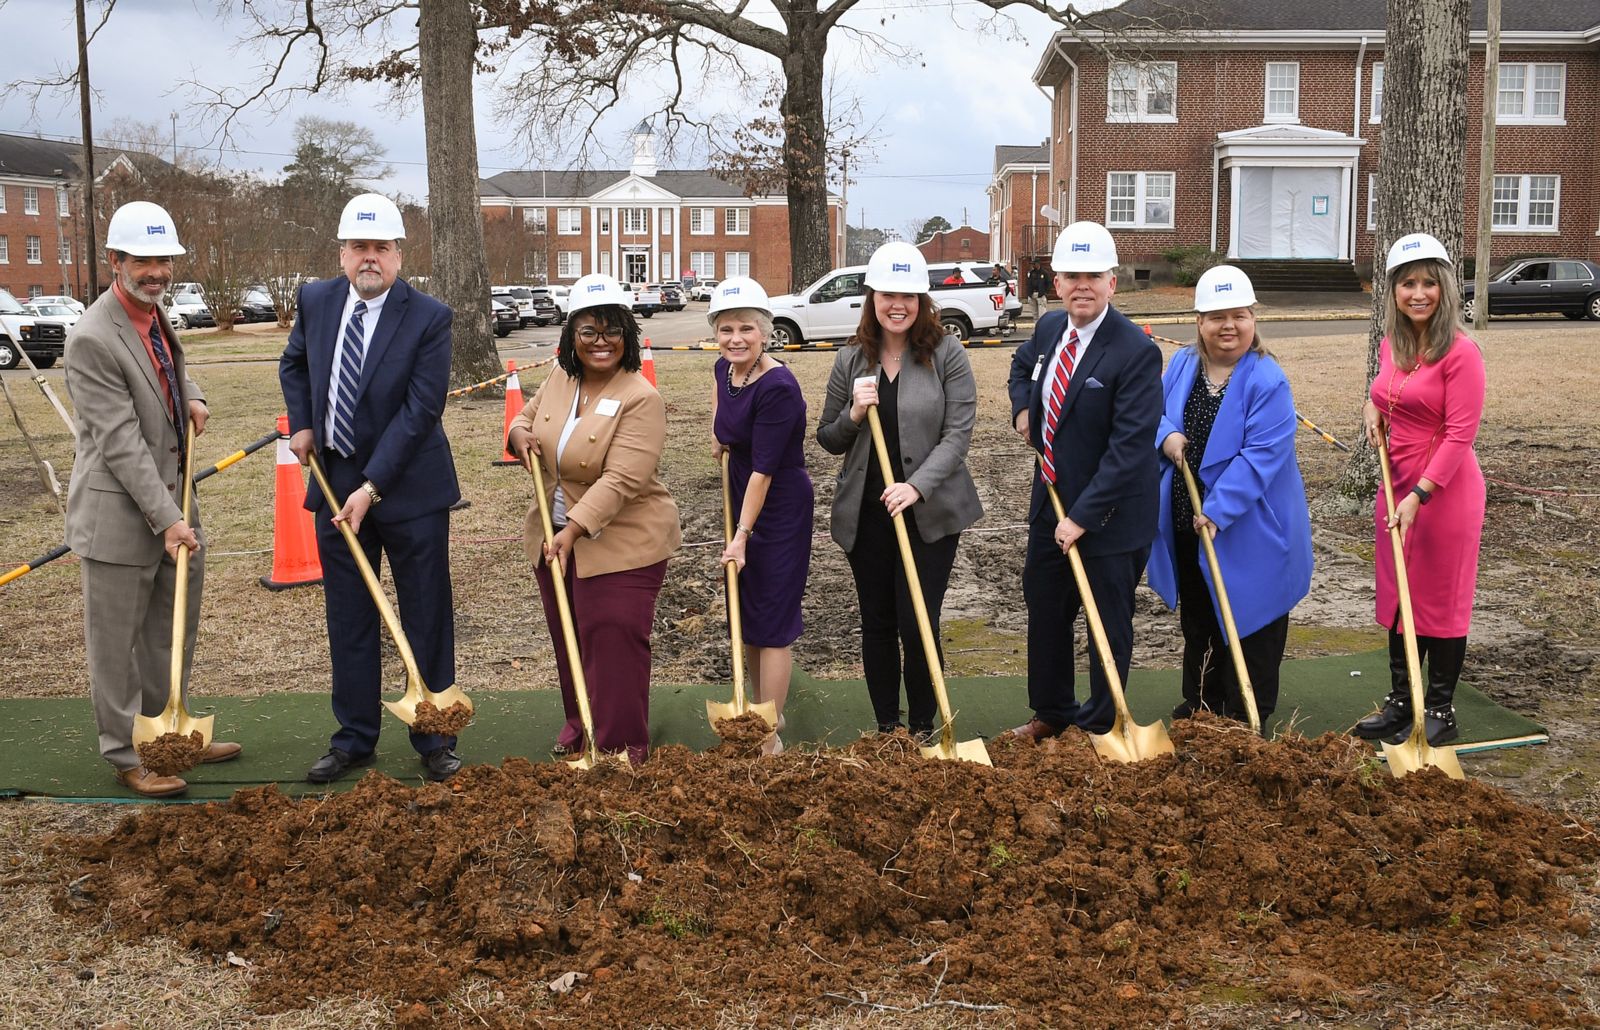 Dr. Kathy Murphy, president of Gadsden State, breaks ground with members of the executive cabinet.